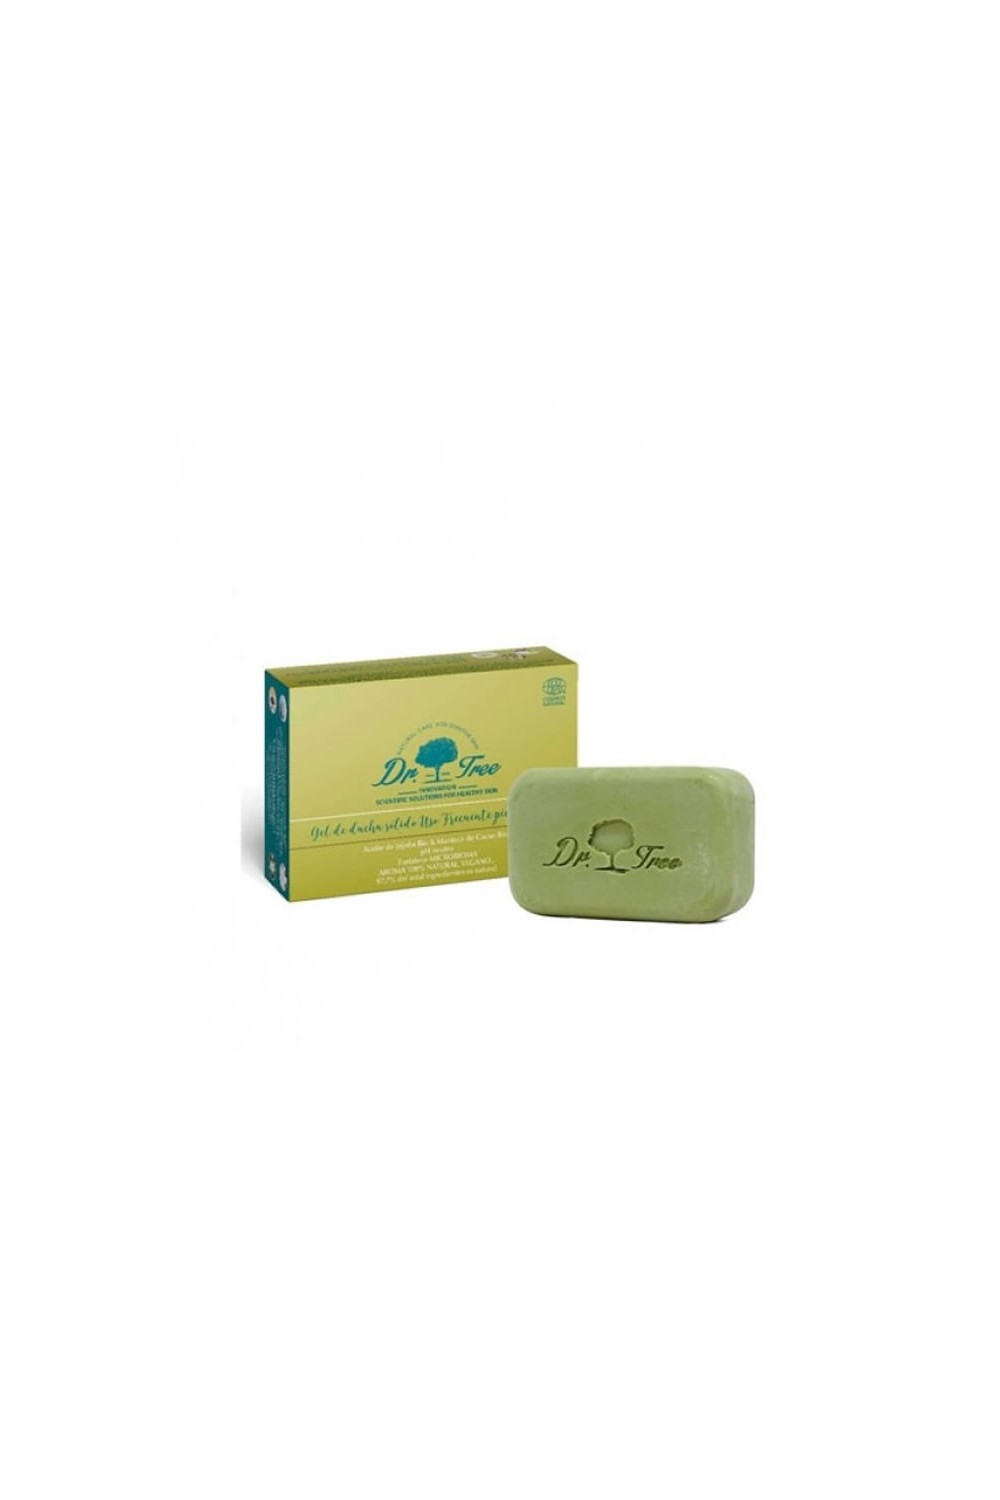 Dr. Tree Frequent Use Solid Gel 120g